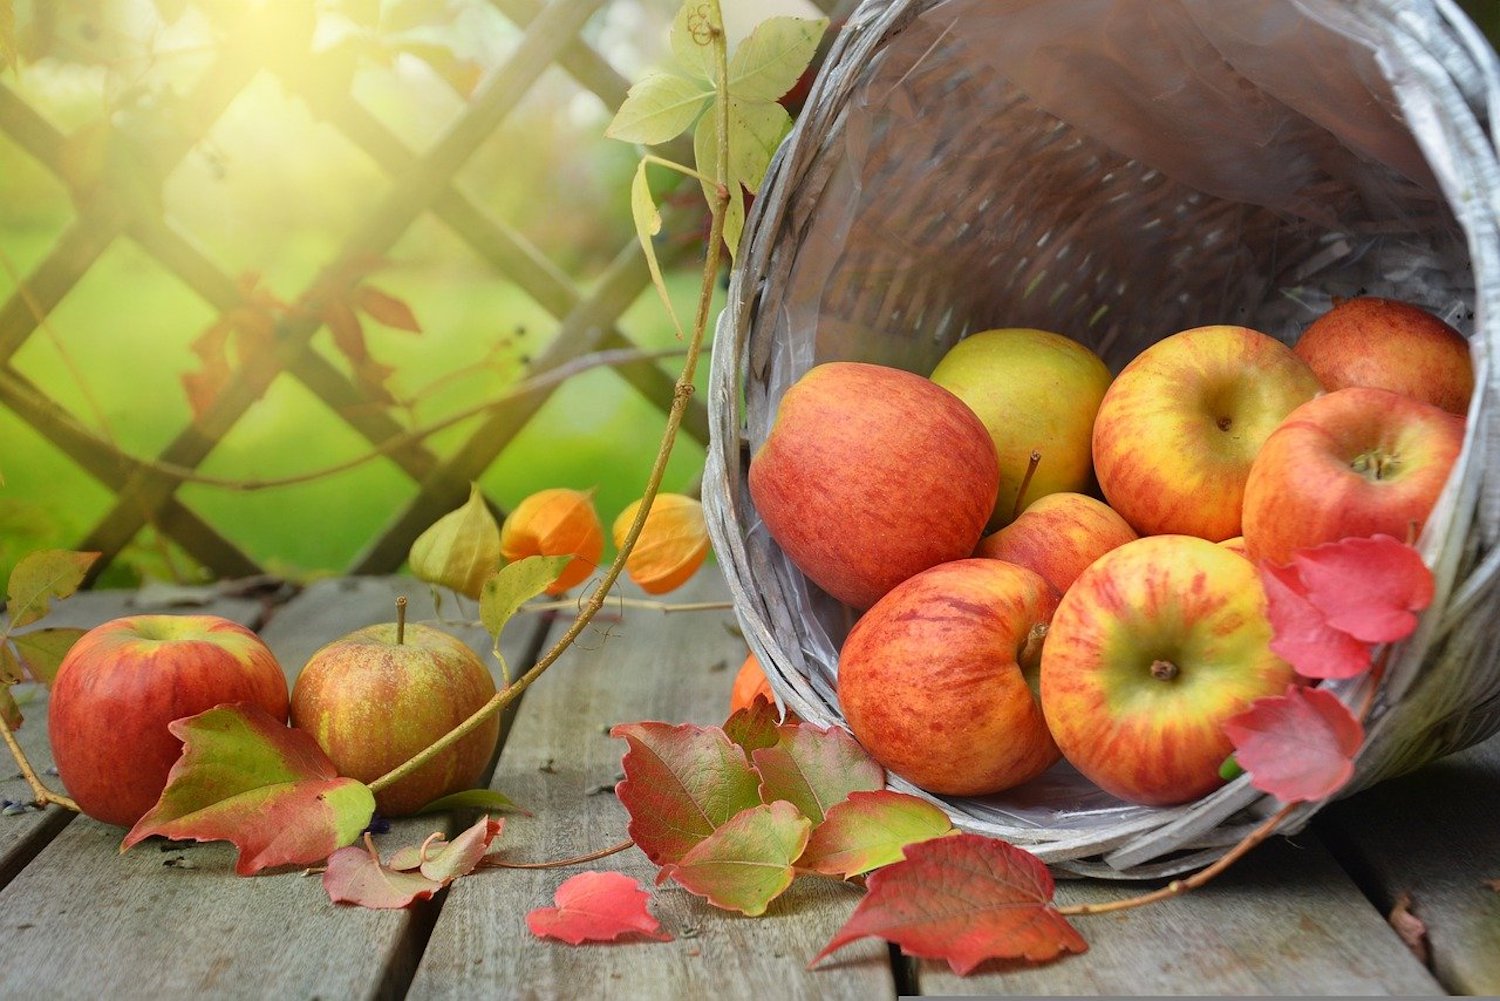 A wooden basket of apples has tipped over next to fall leaves and a wooden trellis outside